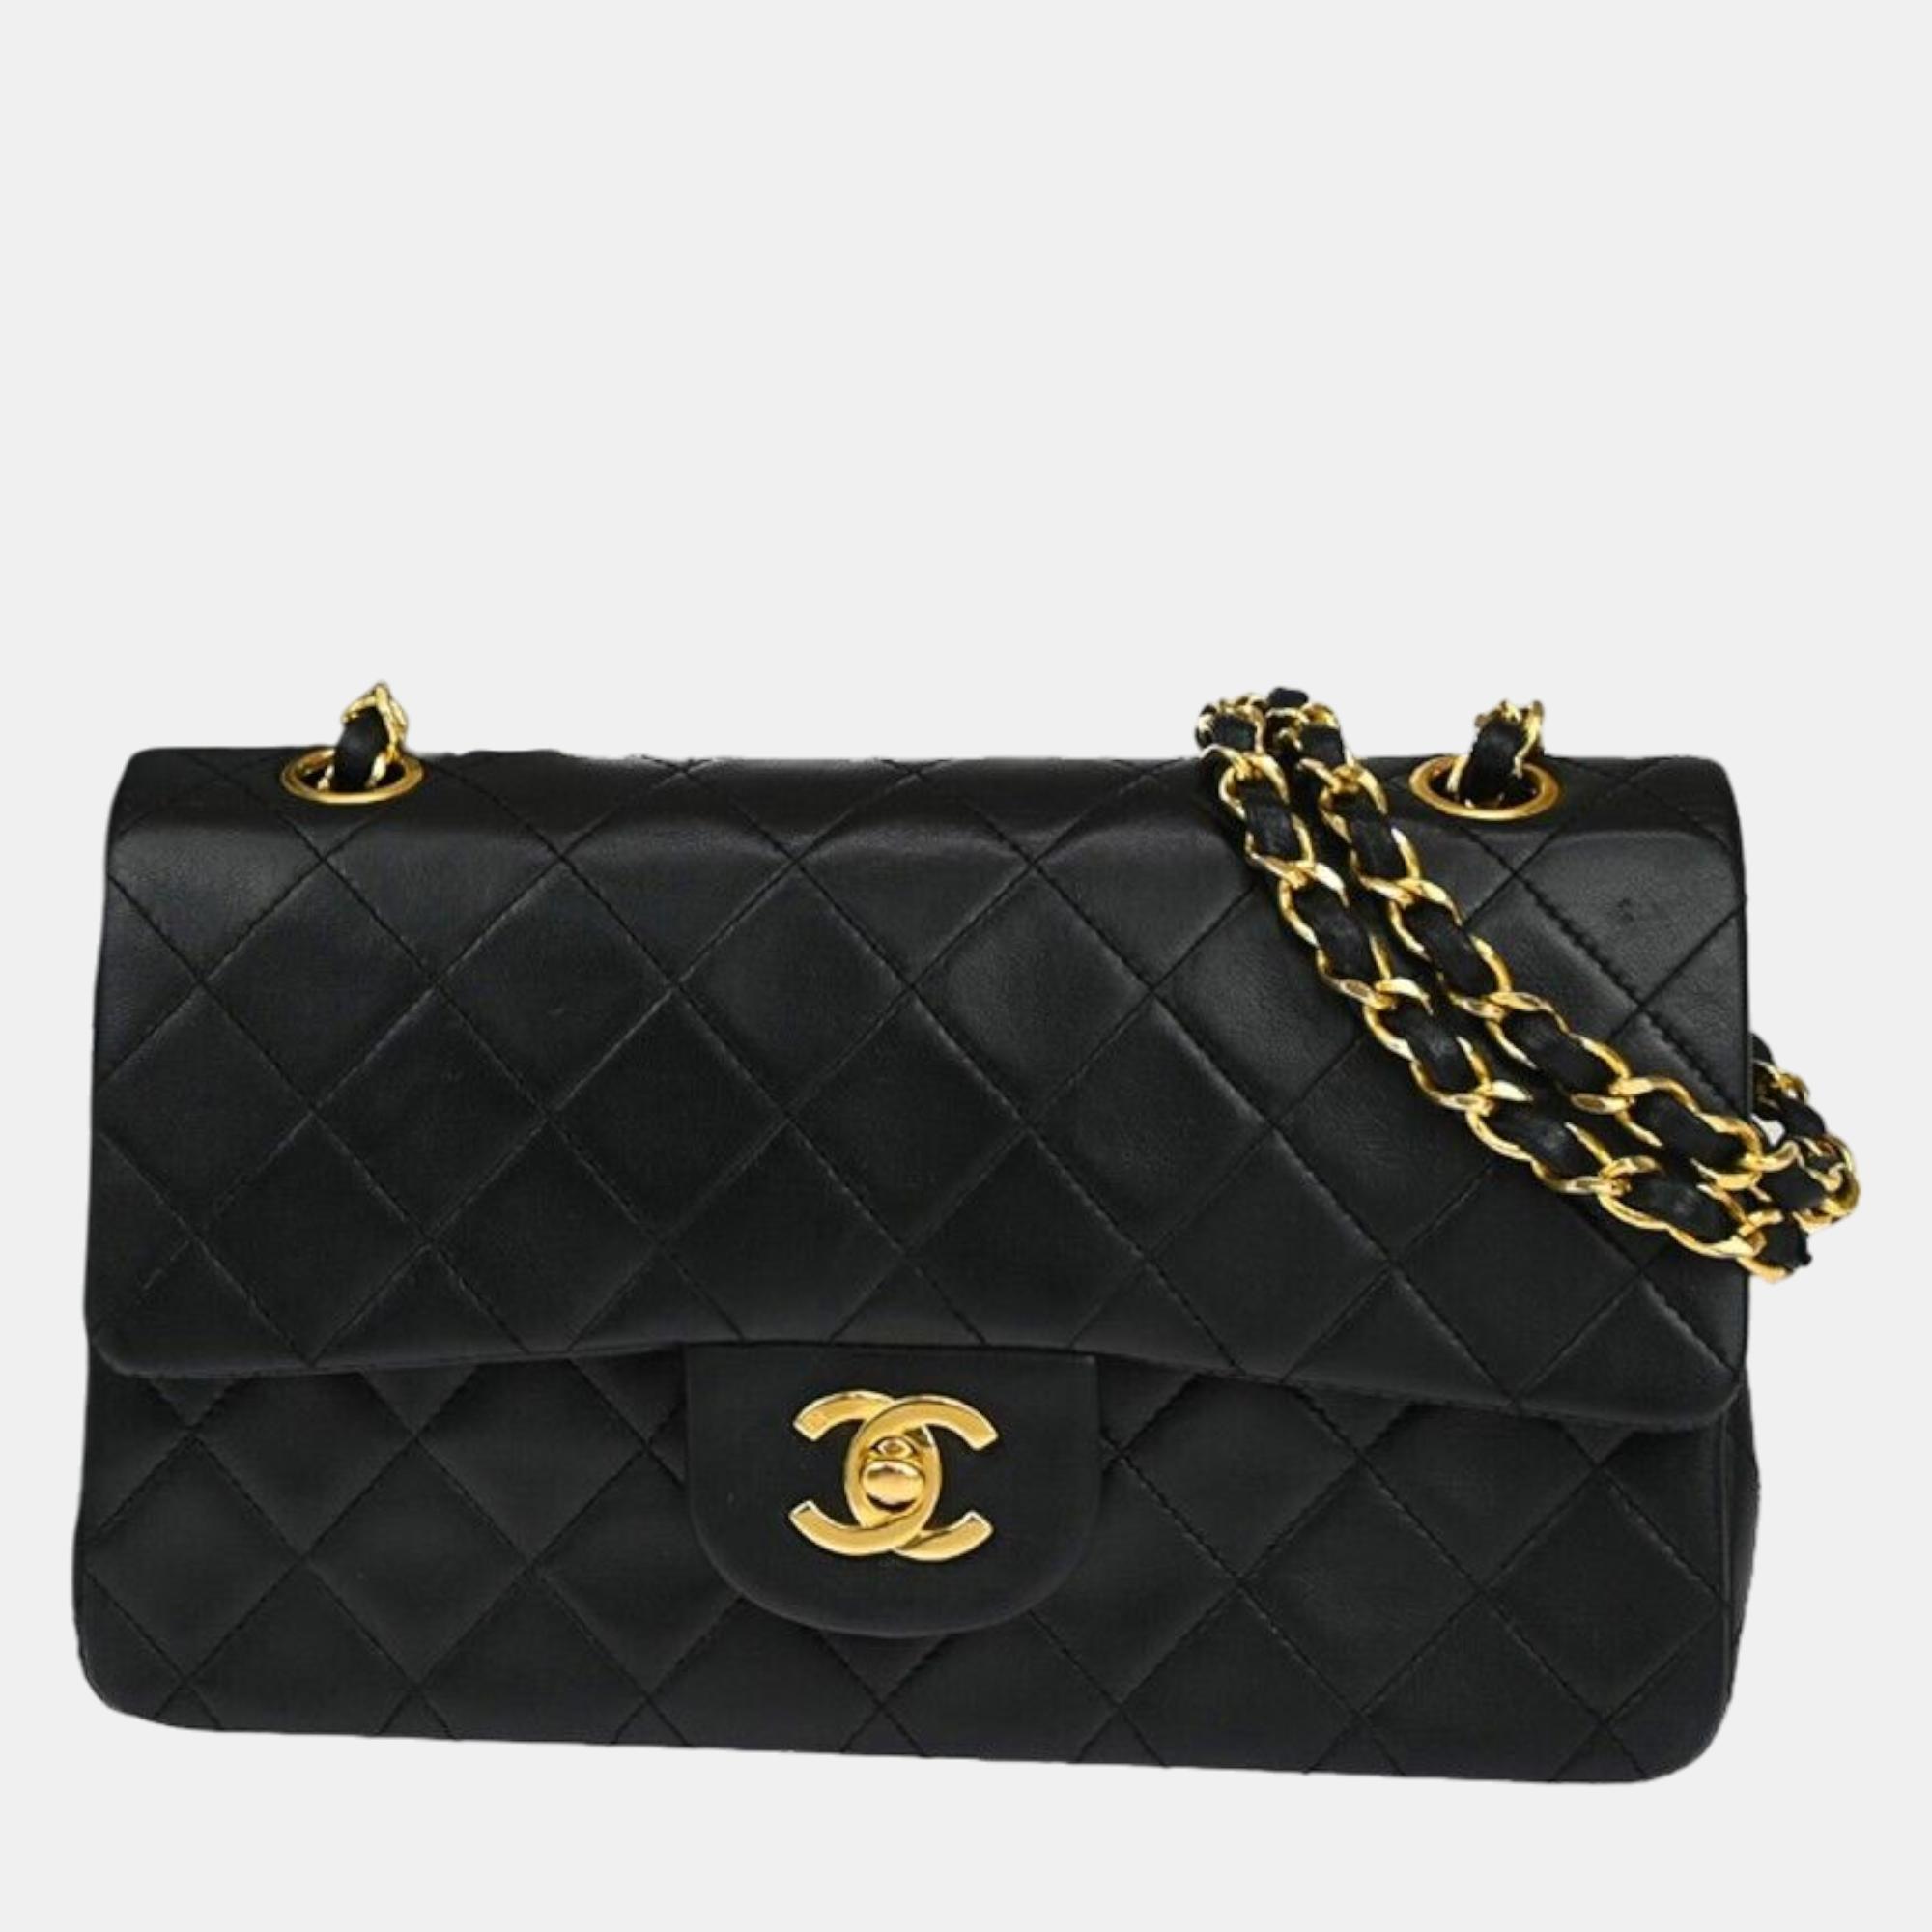 

Chanel Black Leather Small Classic Double Flap Bag